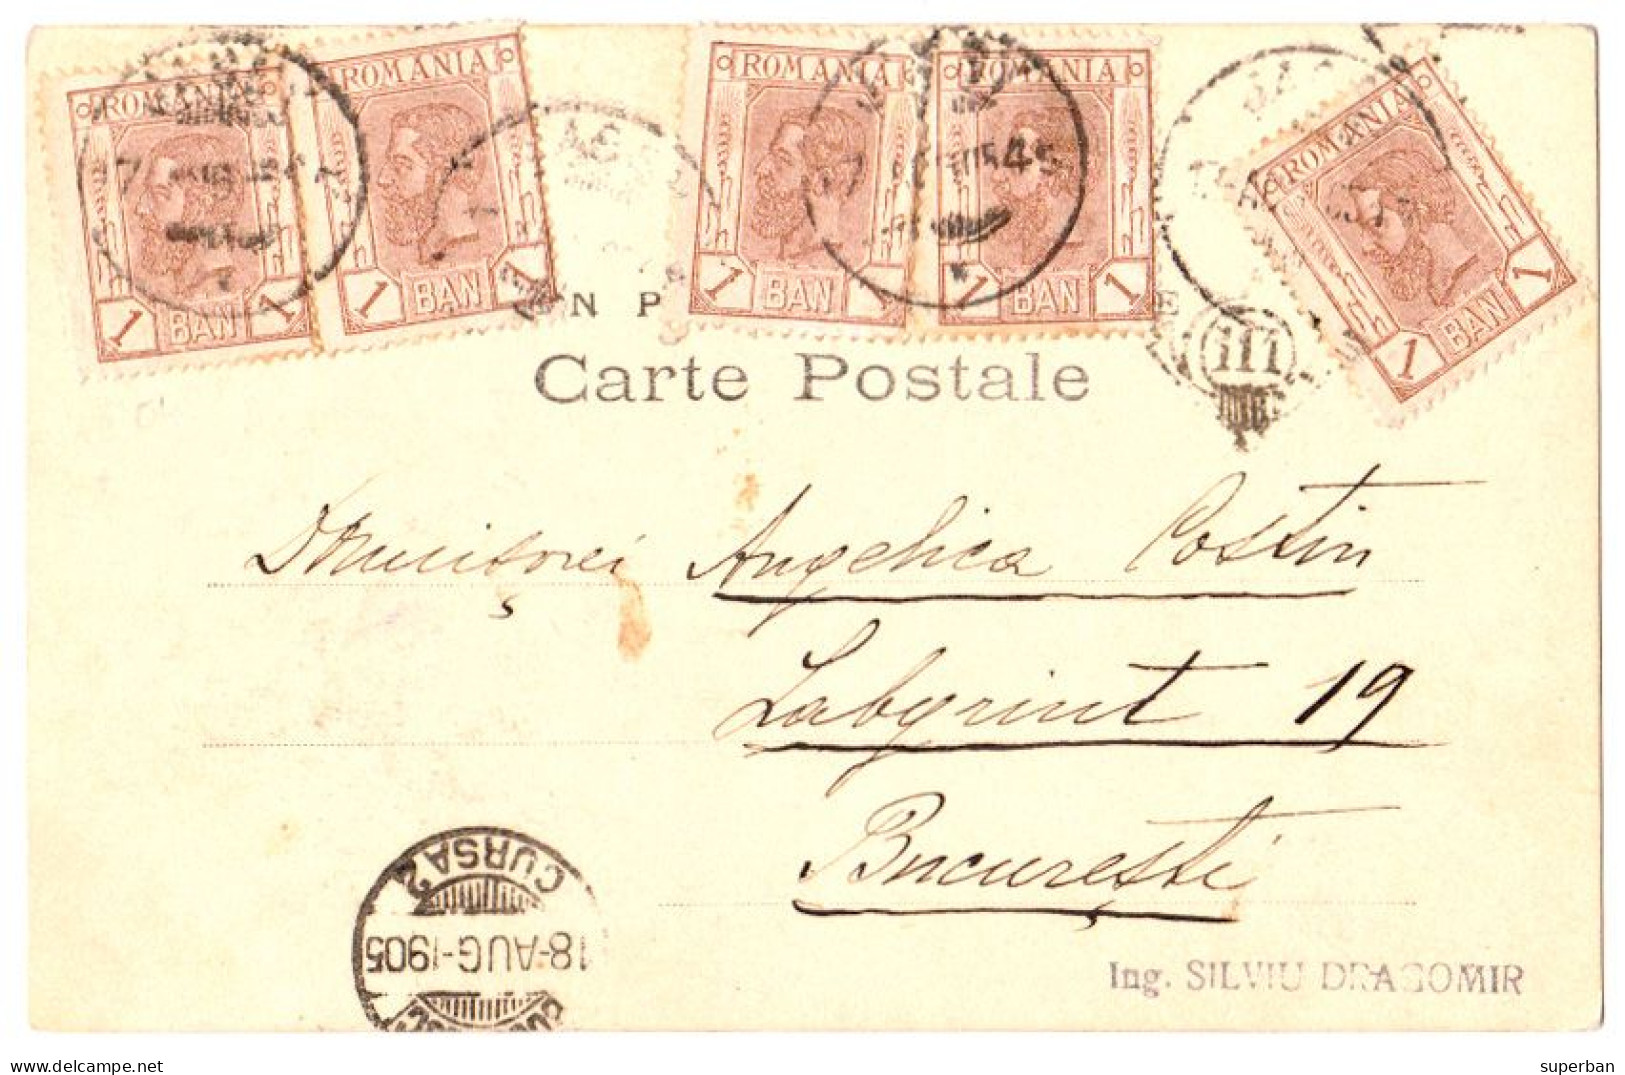 ROMANIA : IASI / JASSY - BEL AFFRANCHISSEMENT MUILTIPLE / NICE FRANKING POSTAGE : 5 TIMBRES / 5 STAMPS - 1905 (an336) - Covers & Documents